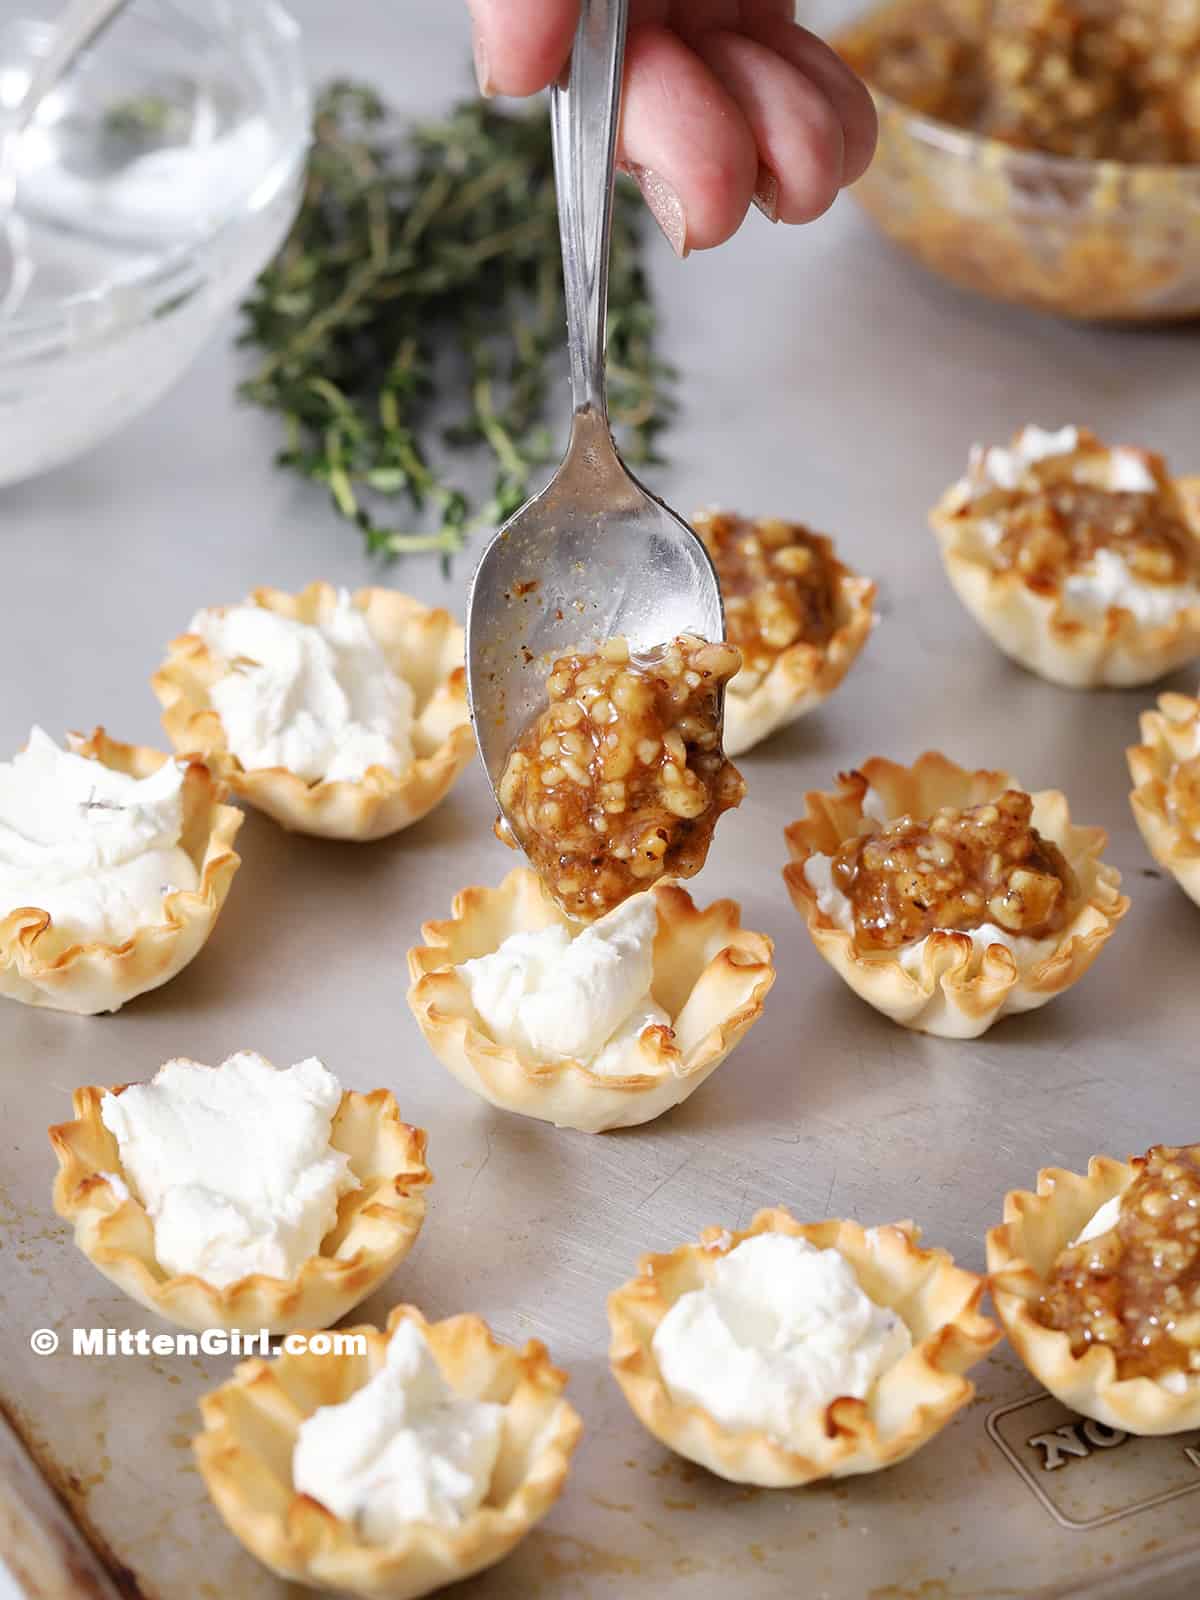 A hand placing a spoon of walnut and honey topping onto a filled phyllo cup.